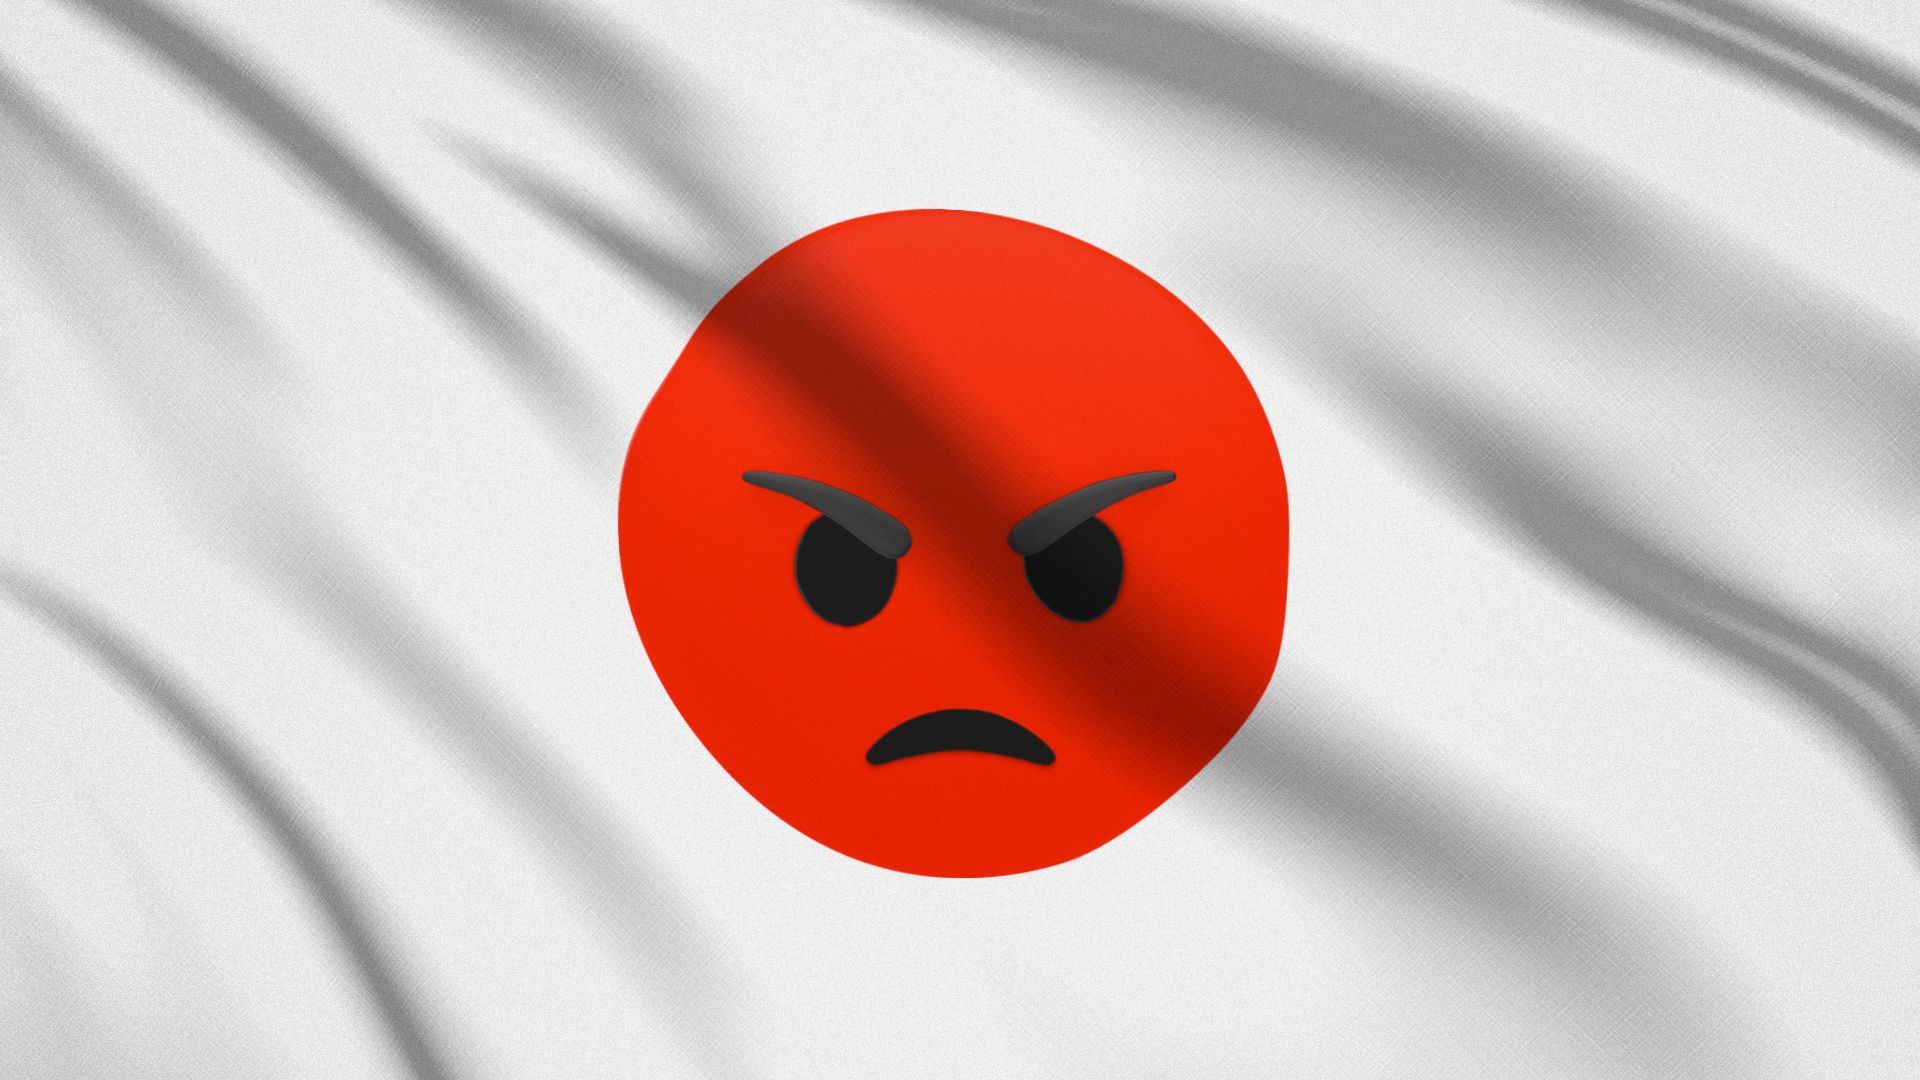 Illustration of a Japanese flag with a red angry emoji face as the center sun. 